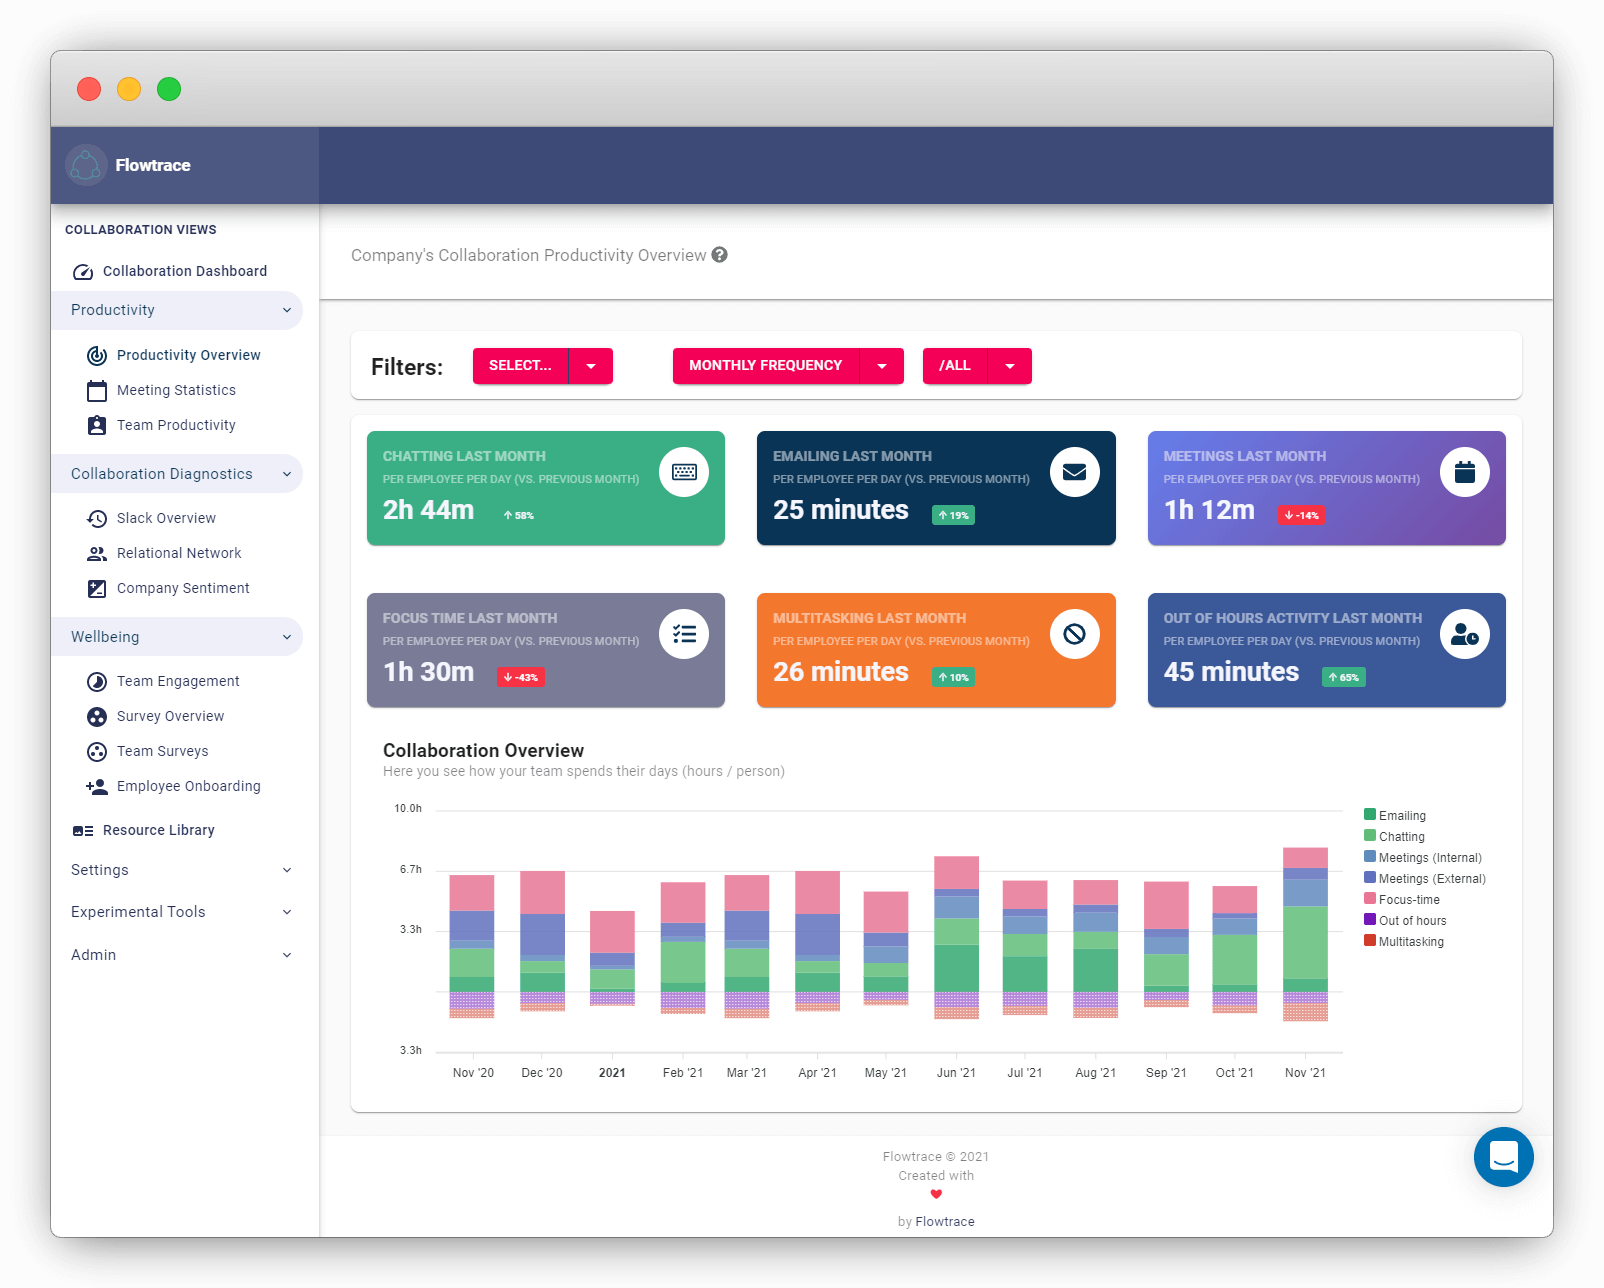 Productivity overview across the tools and teams